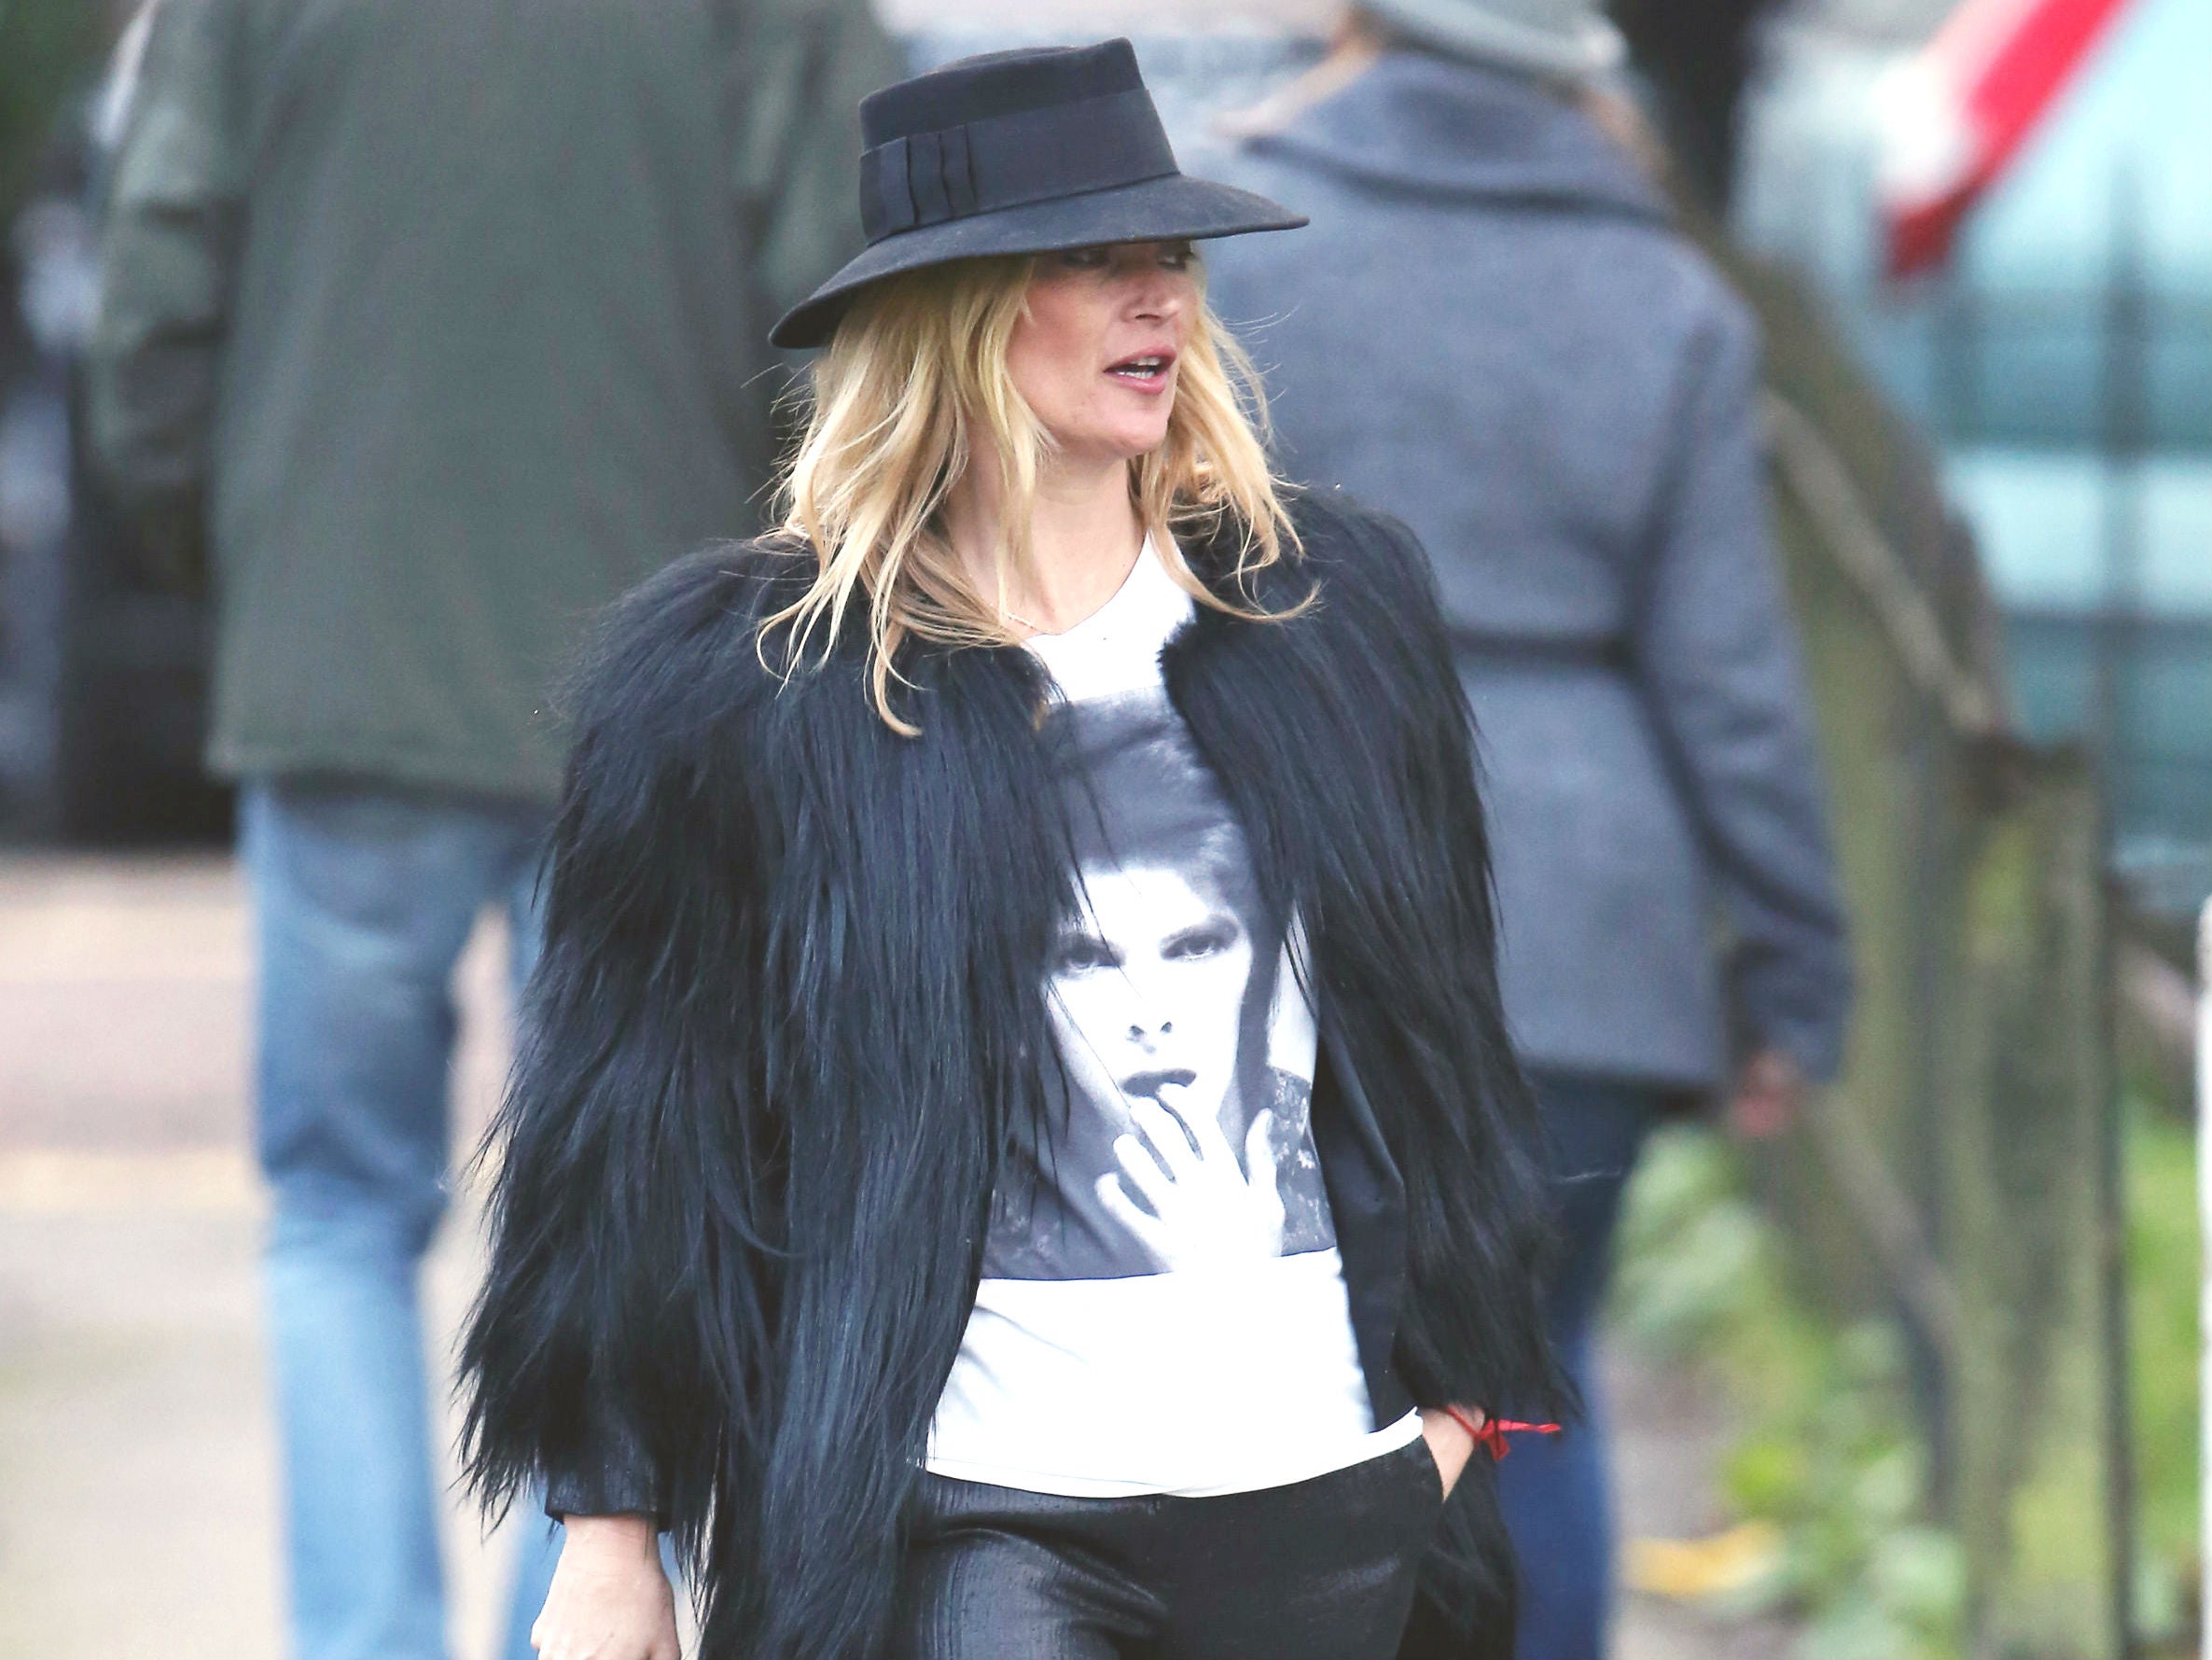 Kate Moss pays tribute to David Bowie wearing a tee with his face on it